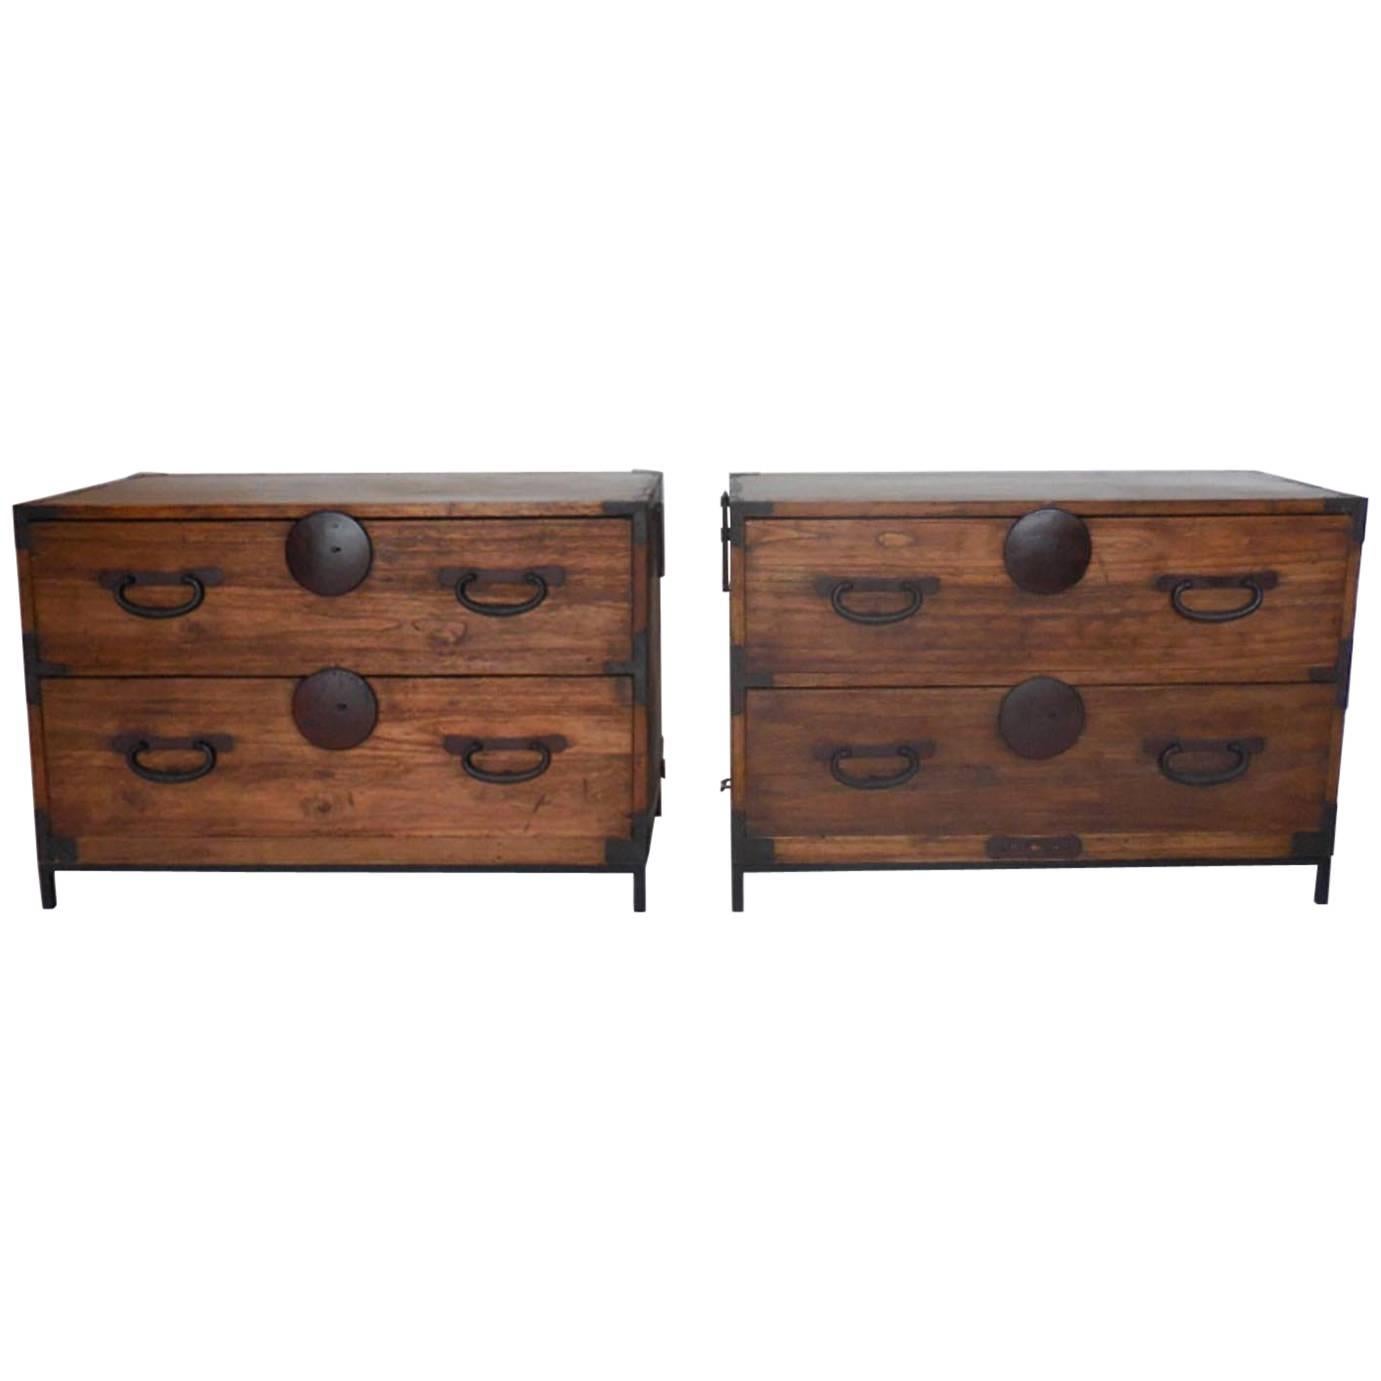 Pair of Japanese 19th Century Tansus/Nightstands on Iron Bases